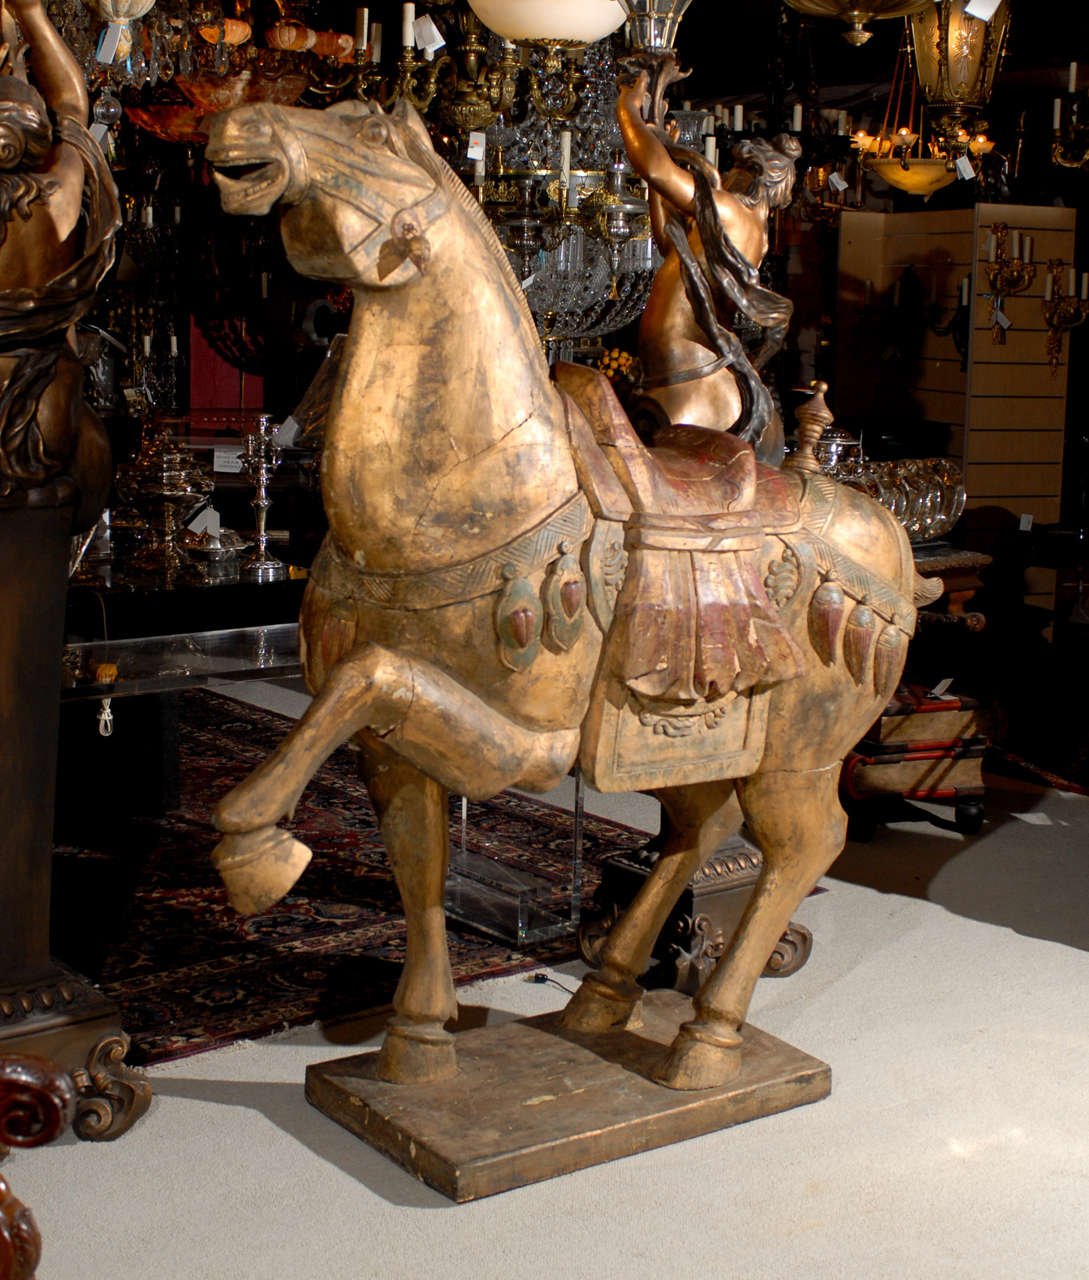 Fine Decoratively Carved Tang Horse
Dimensions: Height 74